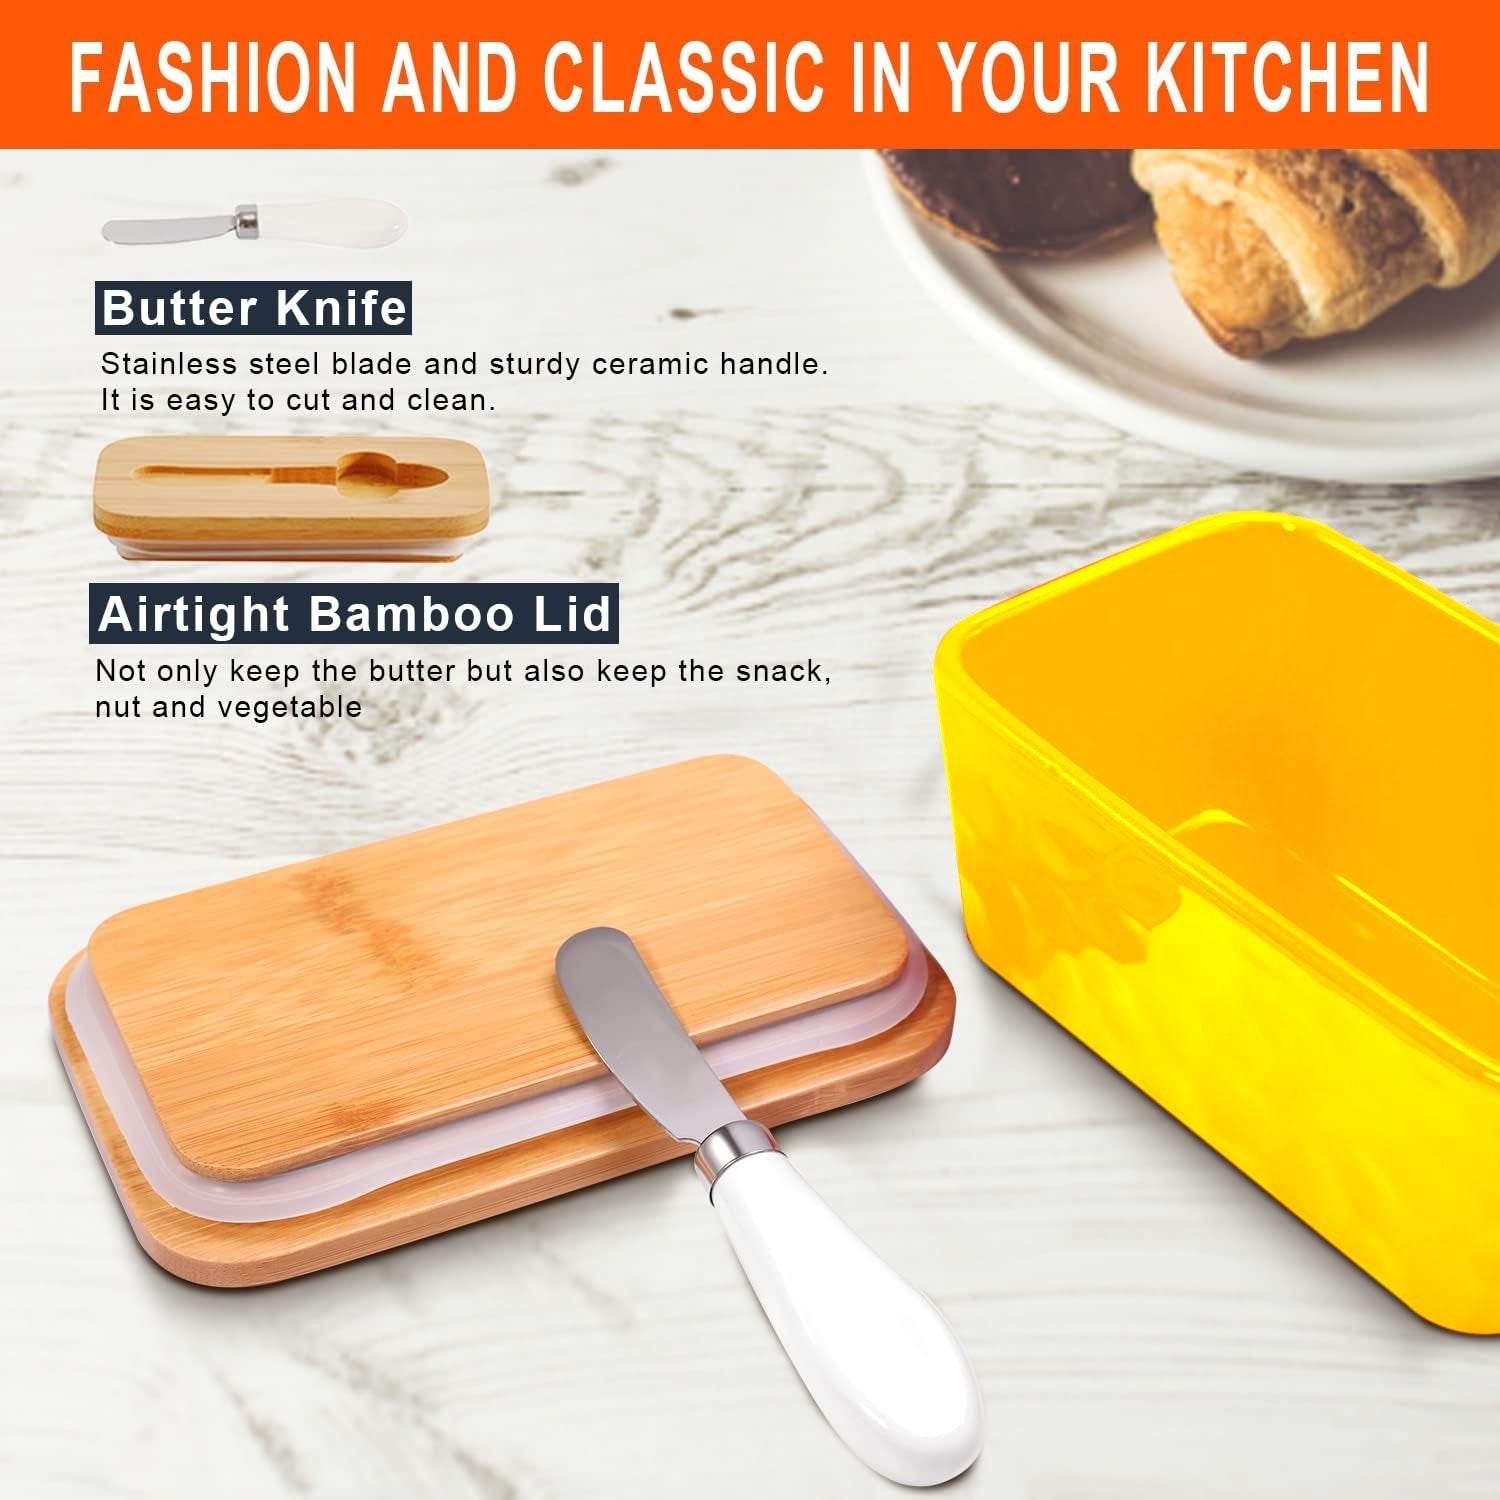 Butter Dishes Box Premium Quality Elite Range Heavy Fine Porcelain Butter Box, Butter Dish with Wooden Top Cover,Lid with a Knife -600 ML